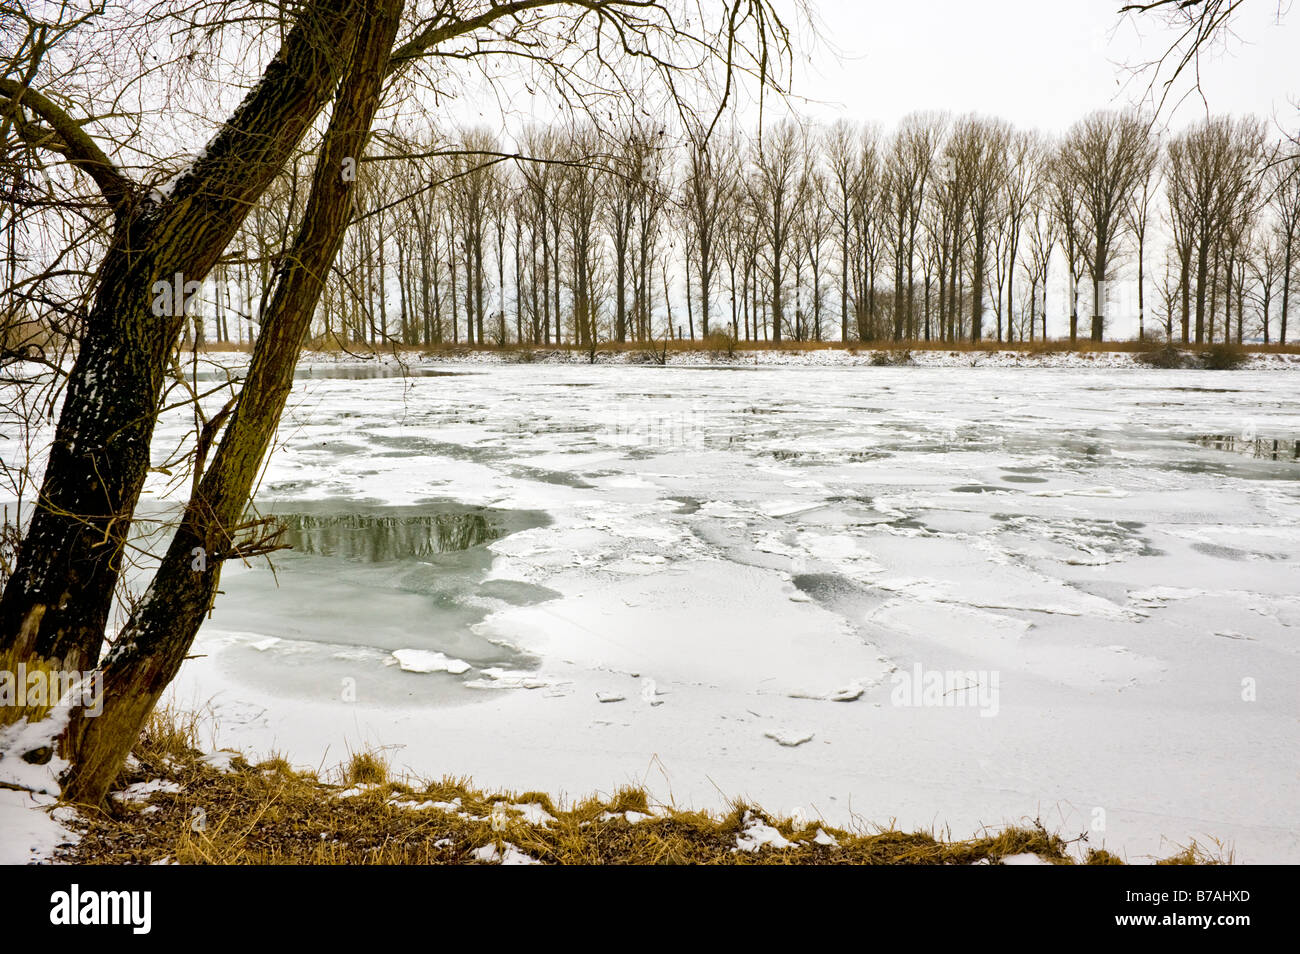 floe floes frozen nature landscape land danube donau river banks winter wintertime white snow ice icy cold cool water trees will Stock Photo